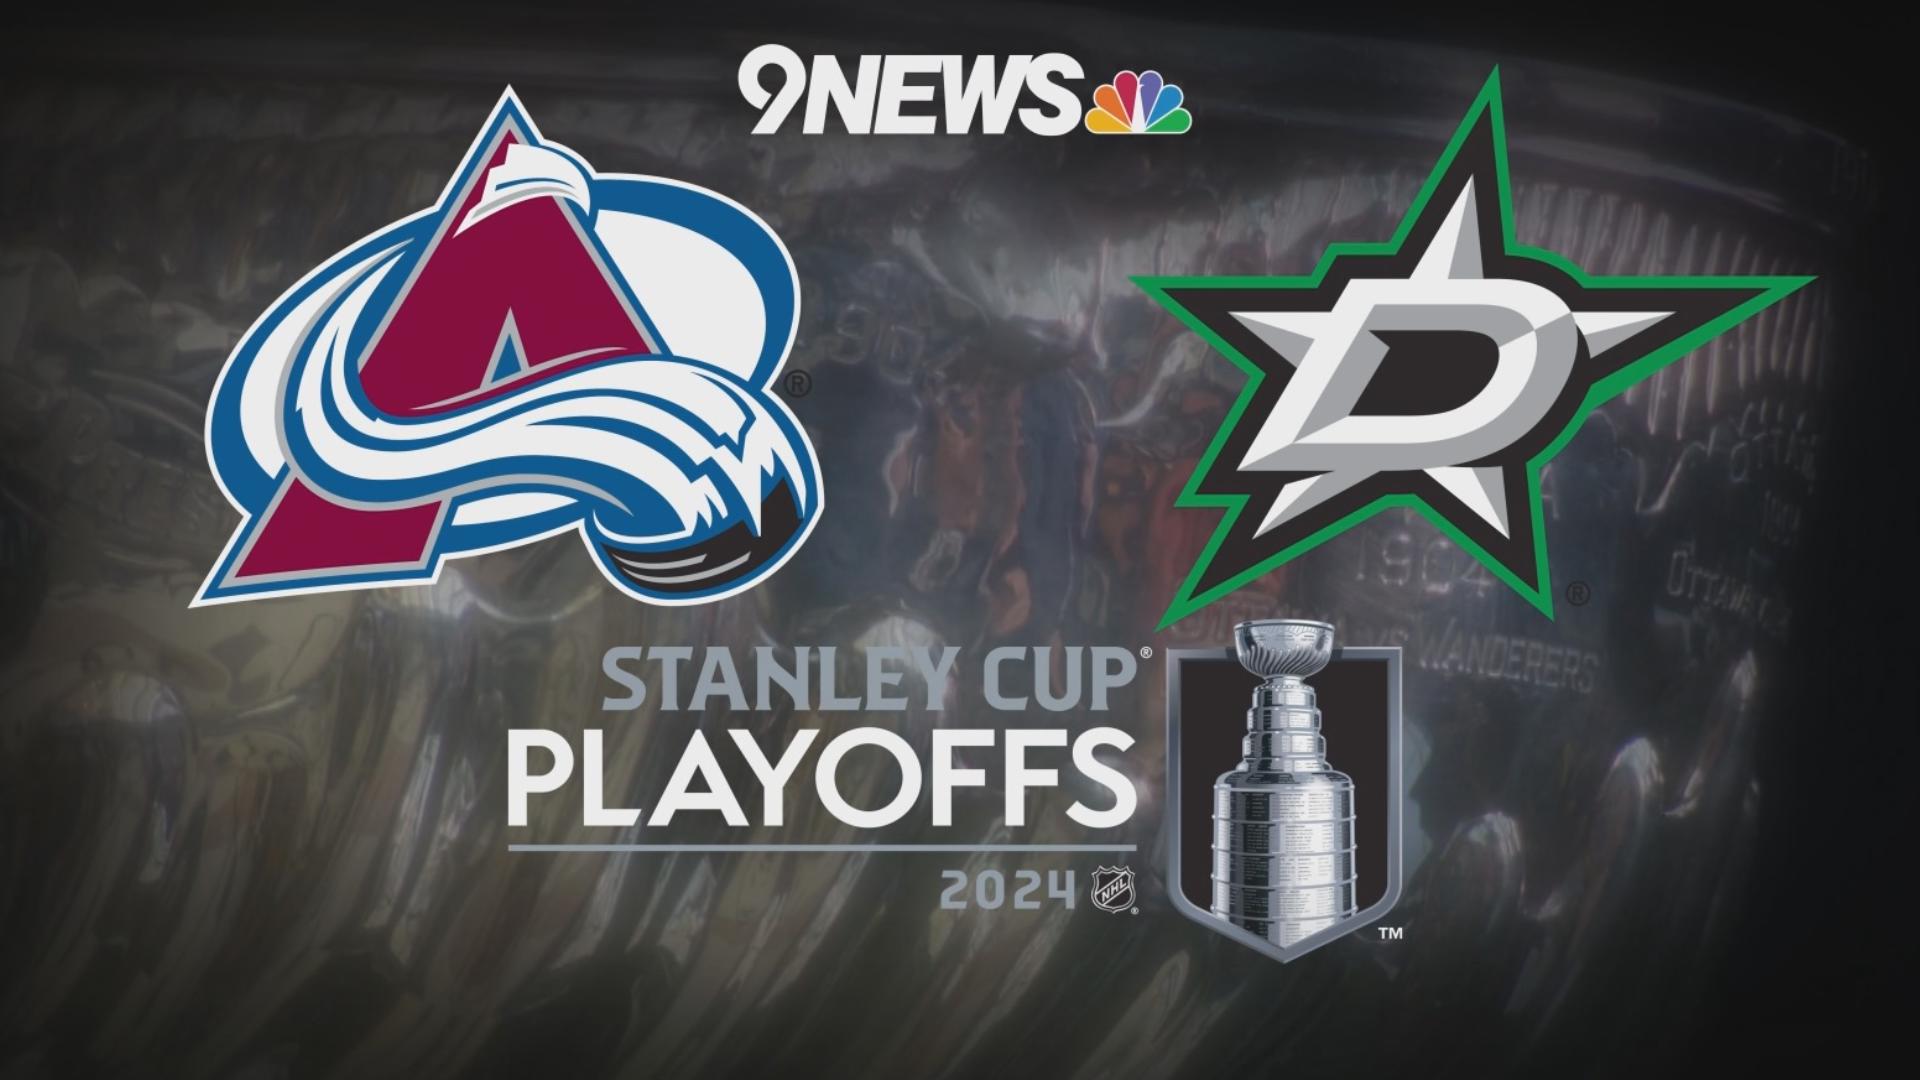 Colorado and Dallas are tied 1-1 in their second-round NHL playoff series